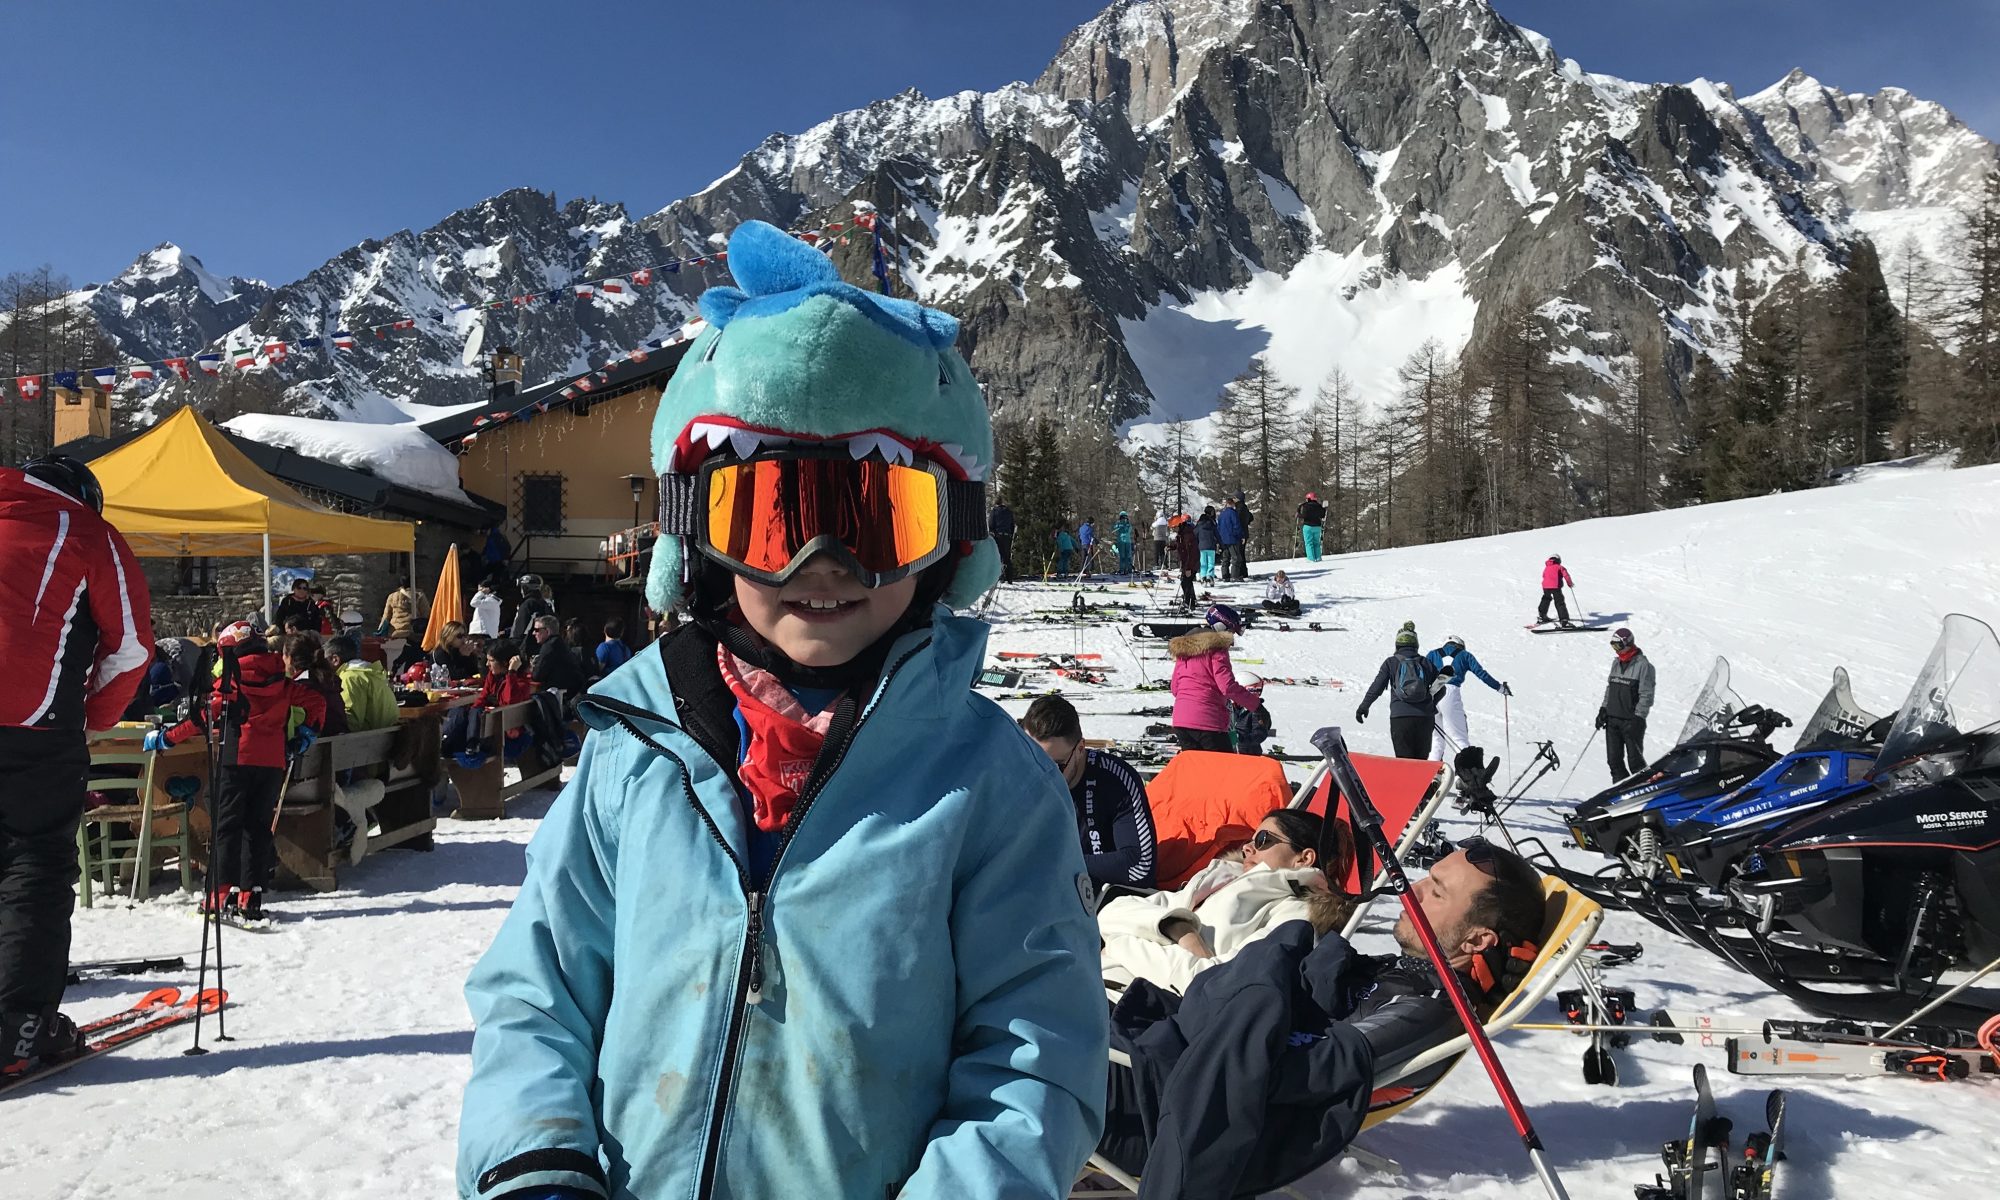 My youngest son at Maison Vielle- with the majestic Mont Blanc behind. Photo: The-Ski-Guru. The Half Term Family Ski Holiday that did not result as planned.